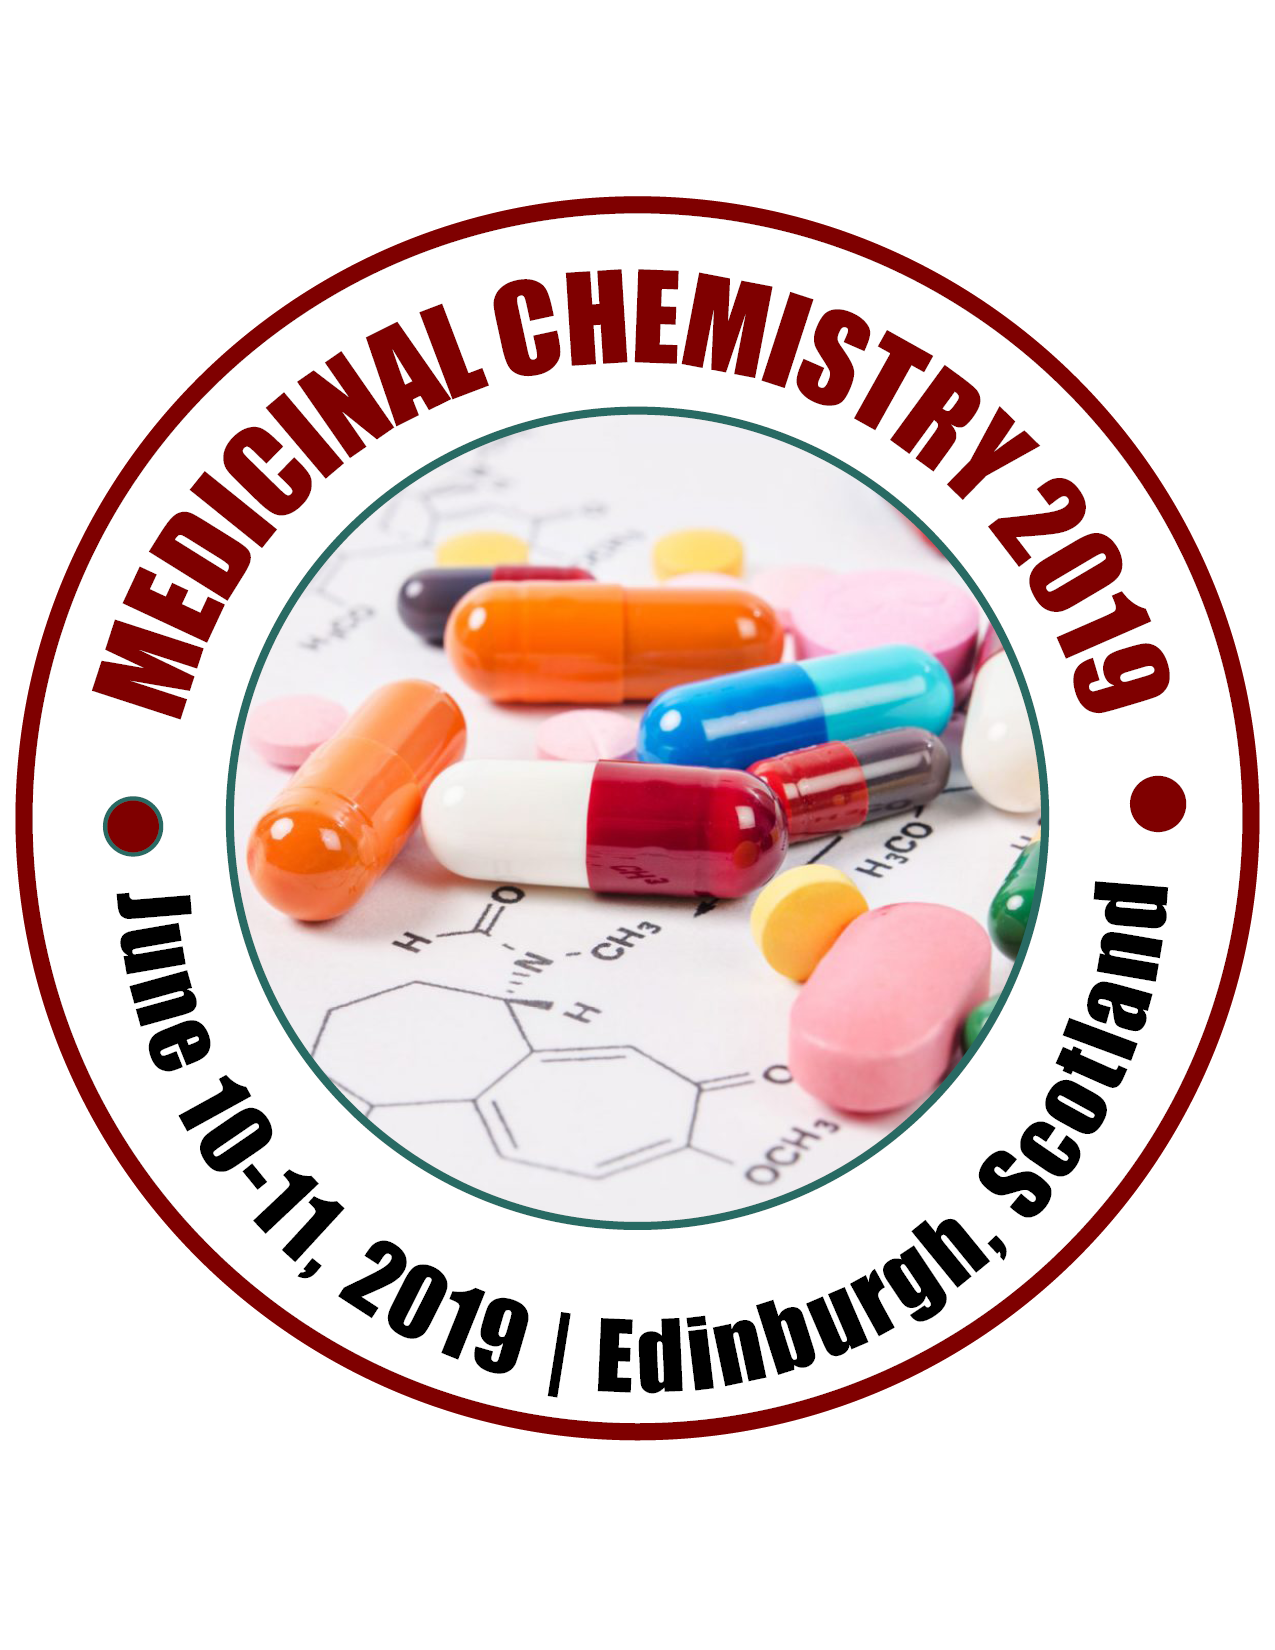 14th World Congress on Medicinal Chemistry and Drug Design